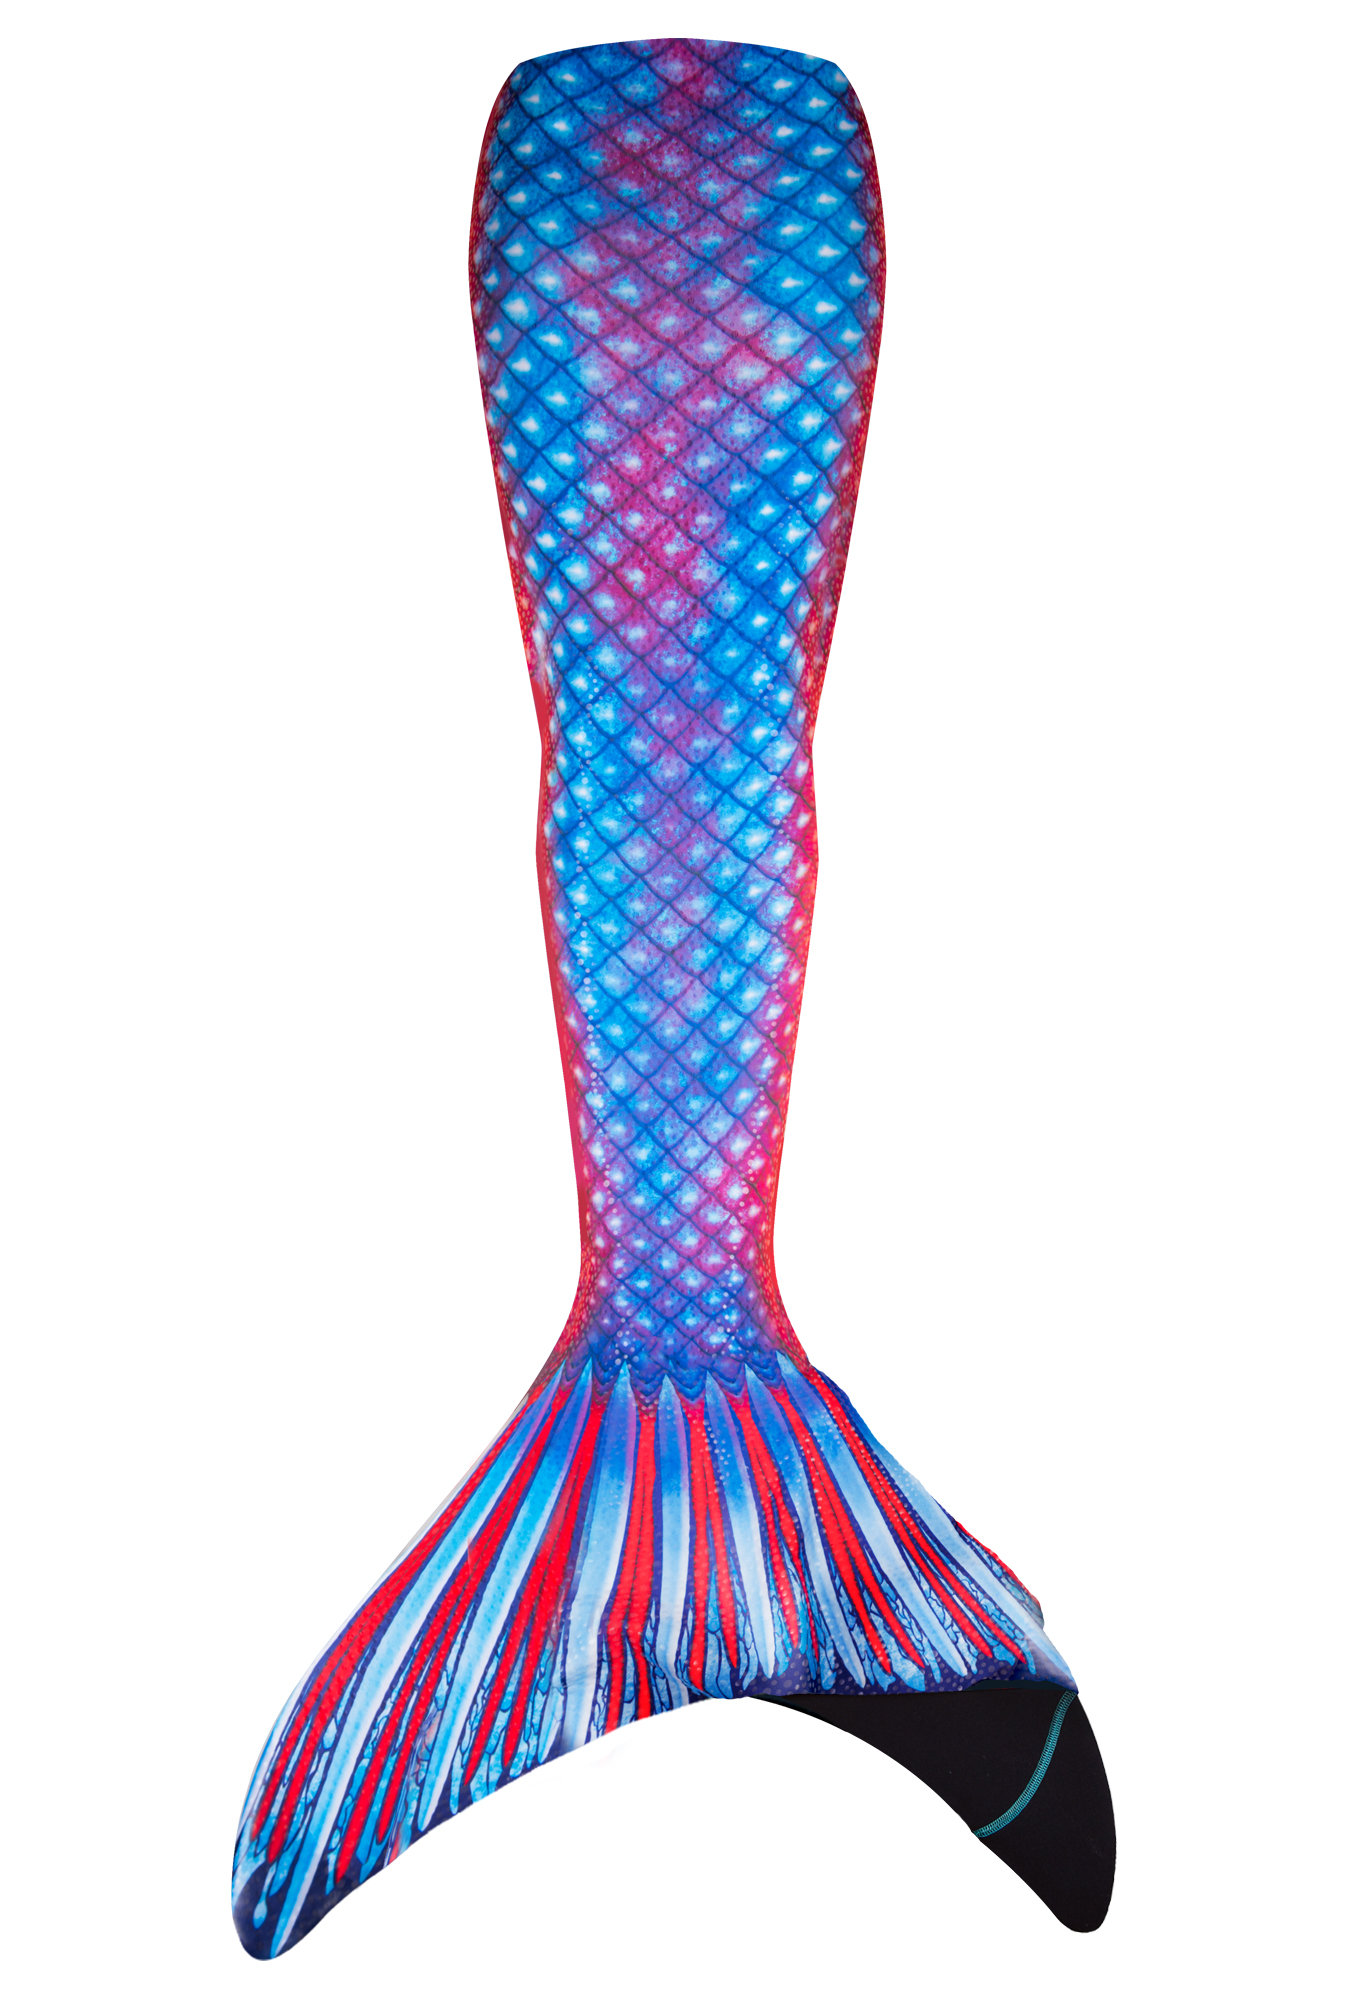 Kids Mermaid Tails for Swimming - Fin Fun Limited Edition - With ...